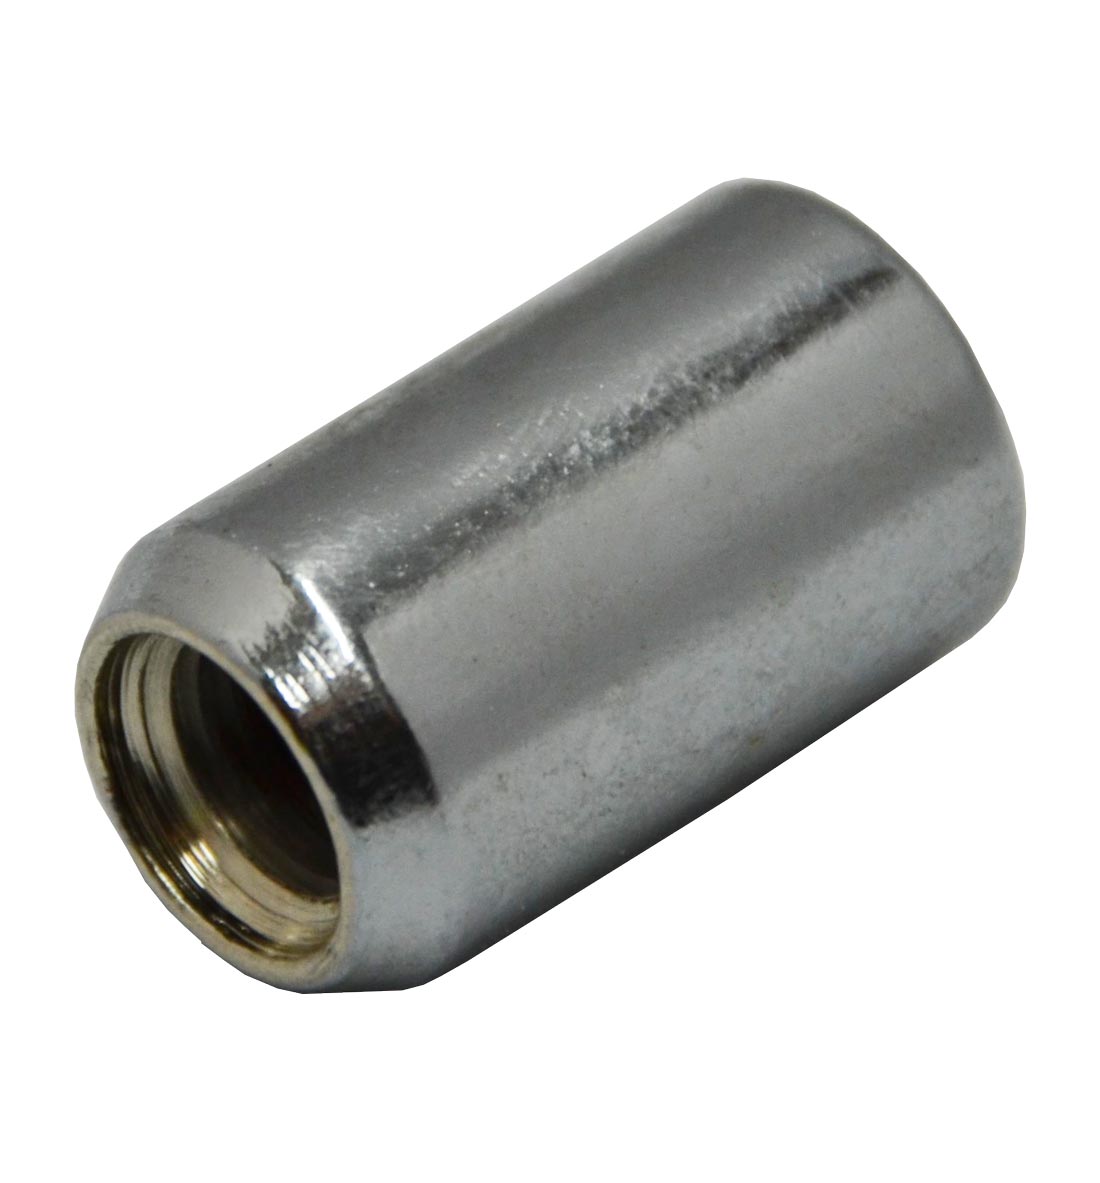 Turner Style Narrow - M12.1.5mm - SNHR14